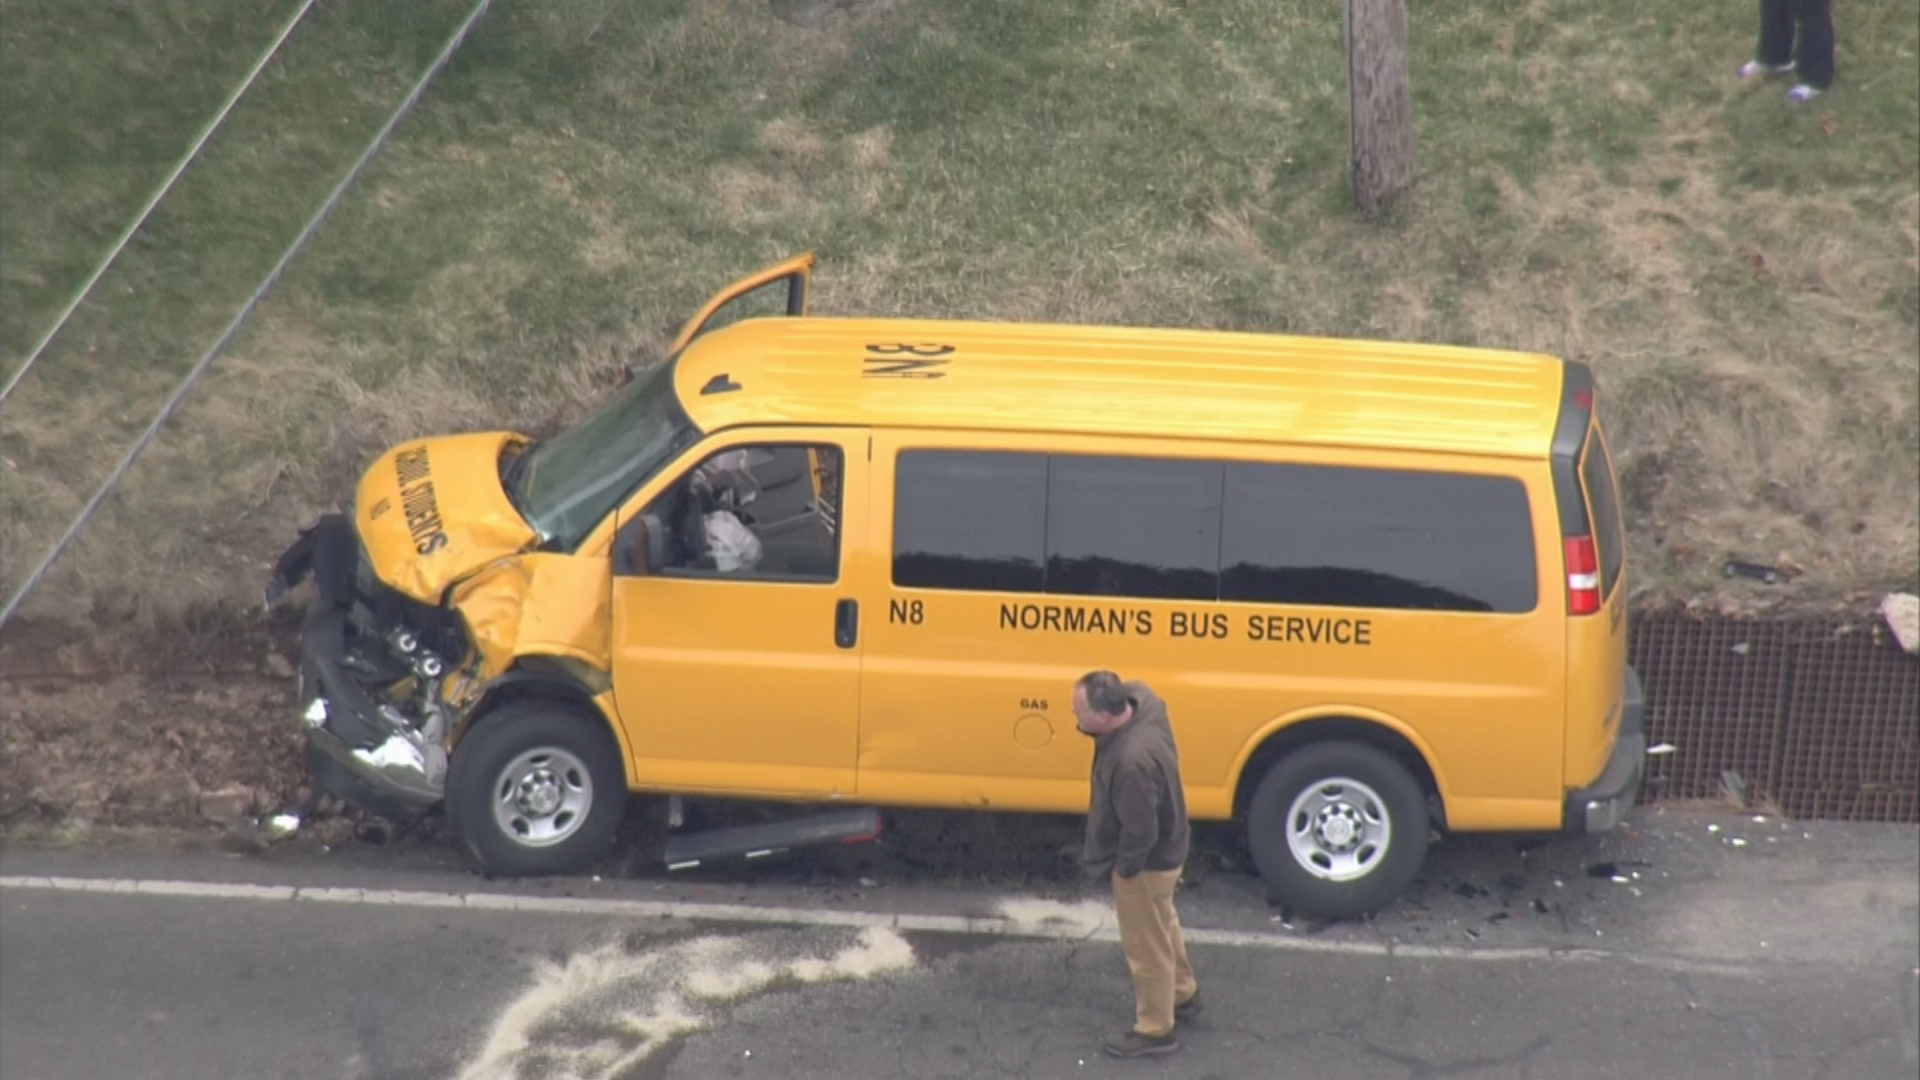 No Serious Injuries Reported Following Crash Involving School Van In Milford Township